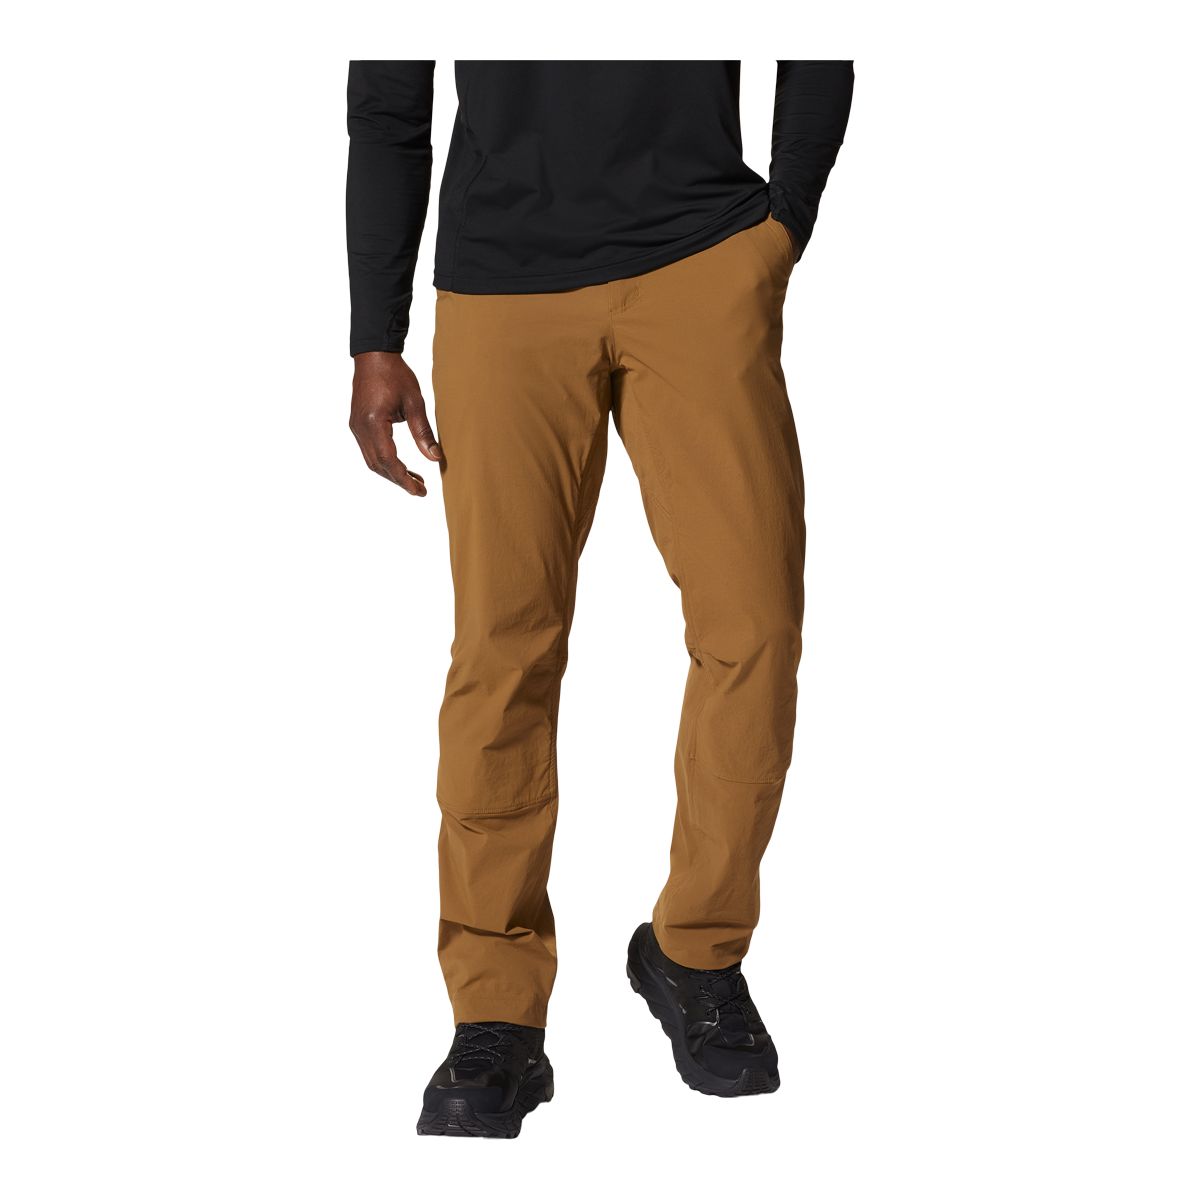 Reebok Mens Training Essentials Woven Lined Pants  Black Size  L in  Hyderabad at best price by Reebok Store  Justdial